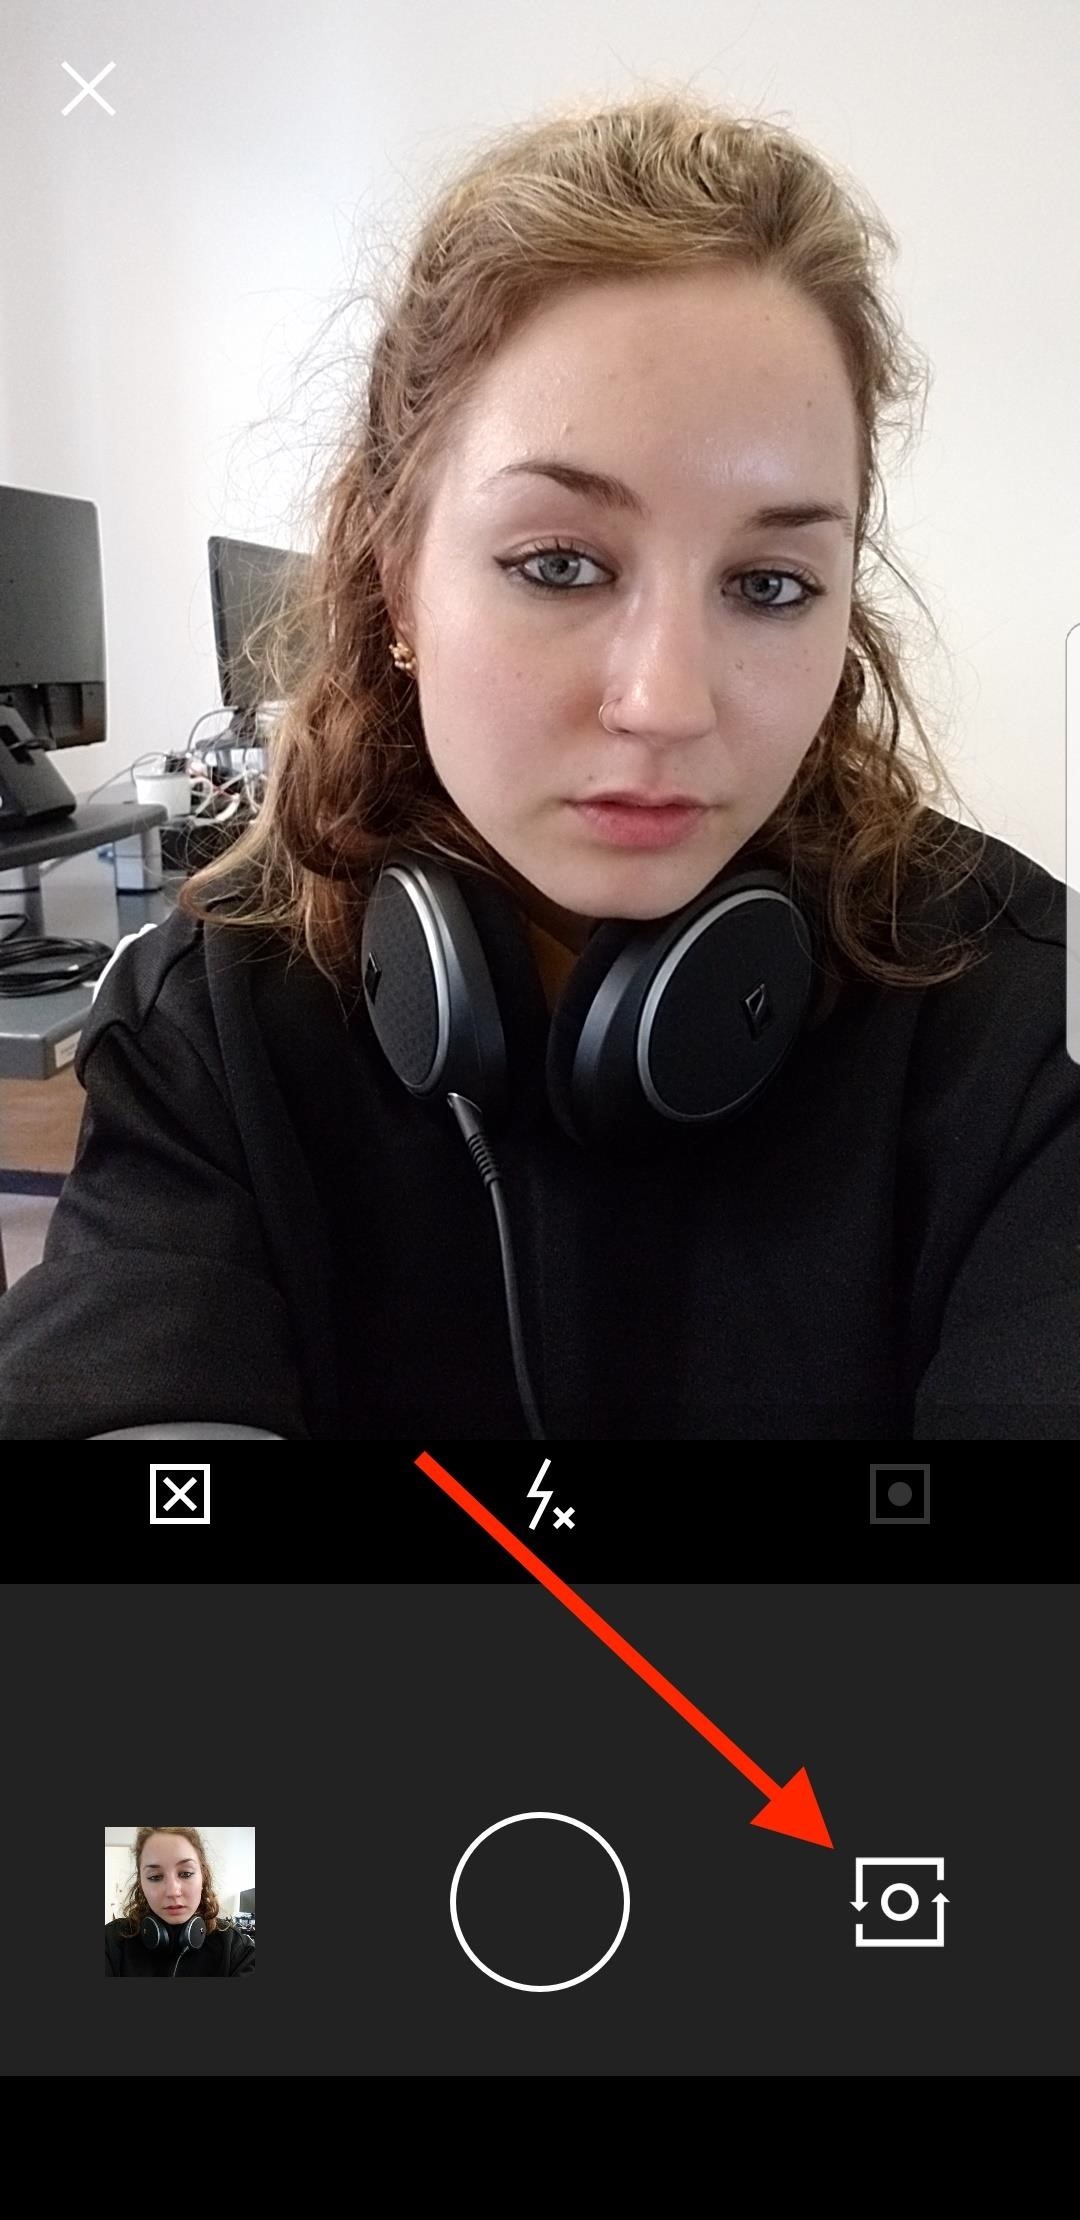 VSCO 101: How to Use the Selfie Camera on Your Android Phone